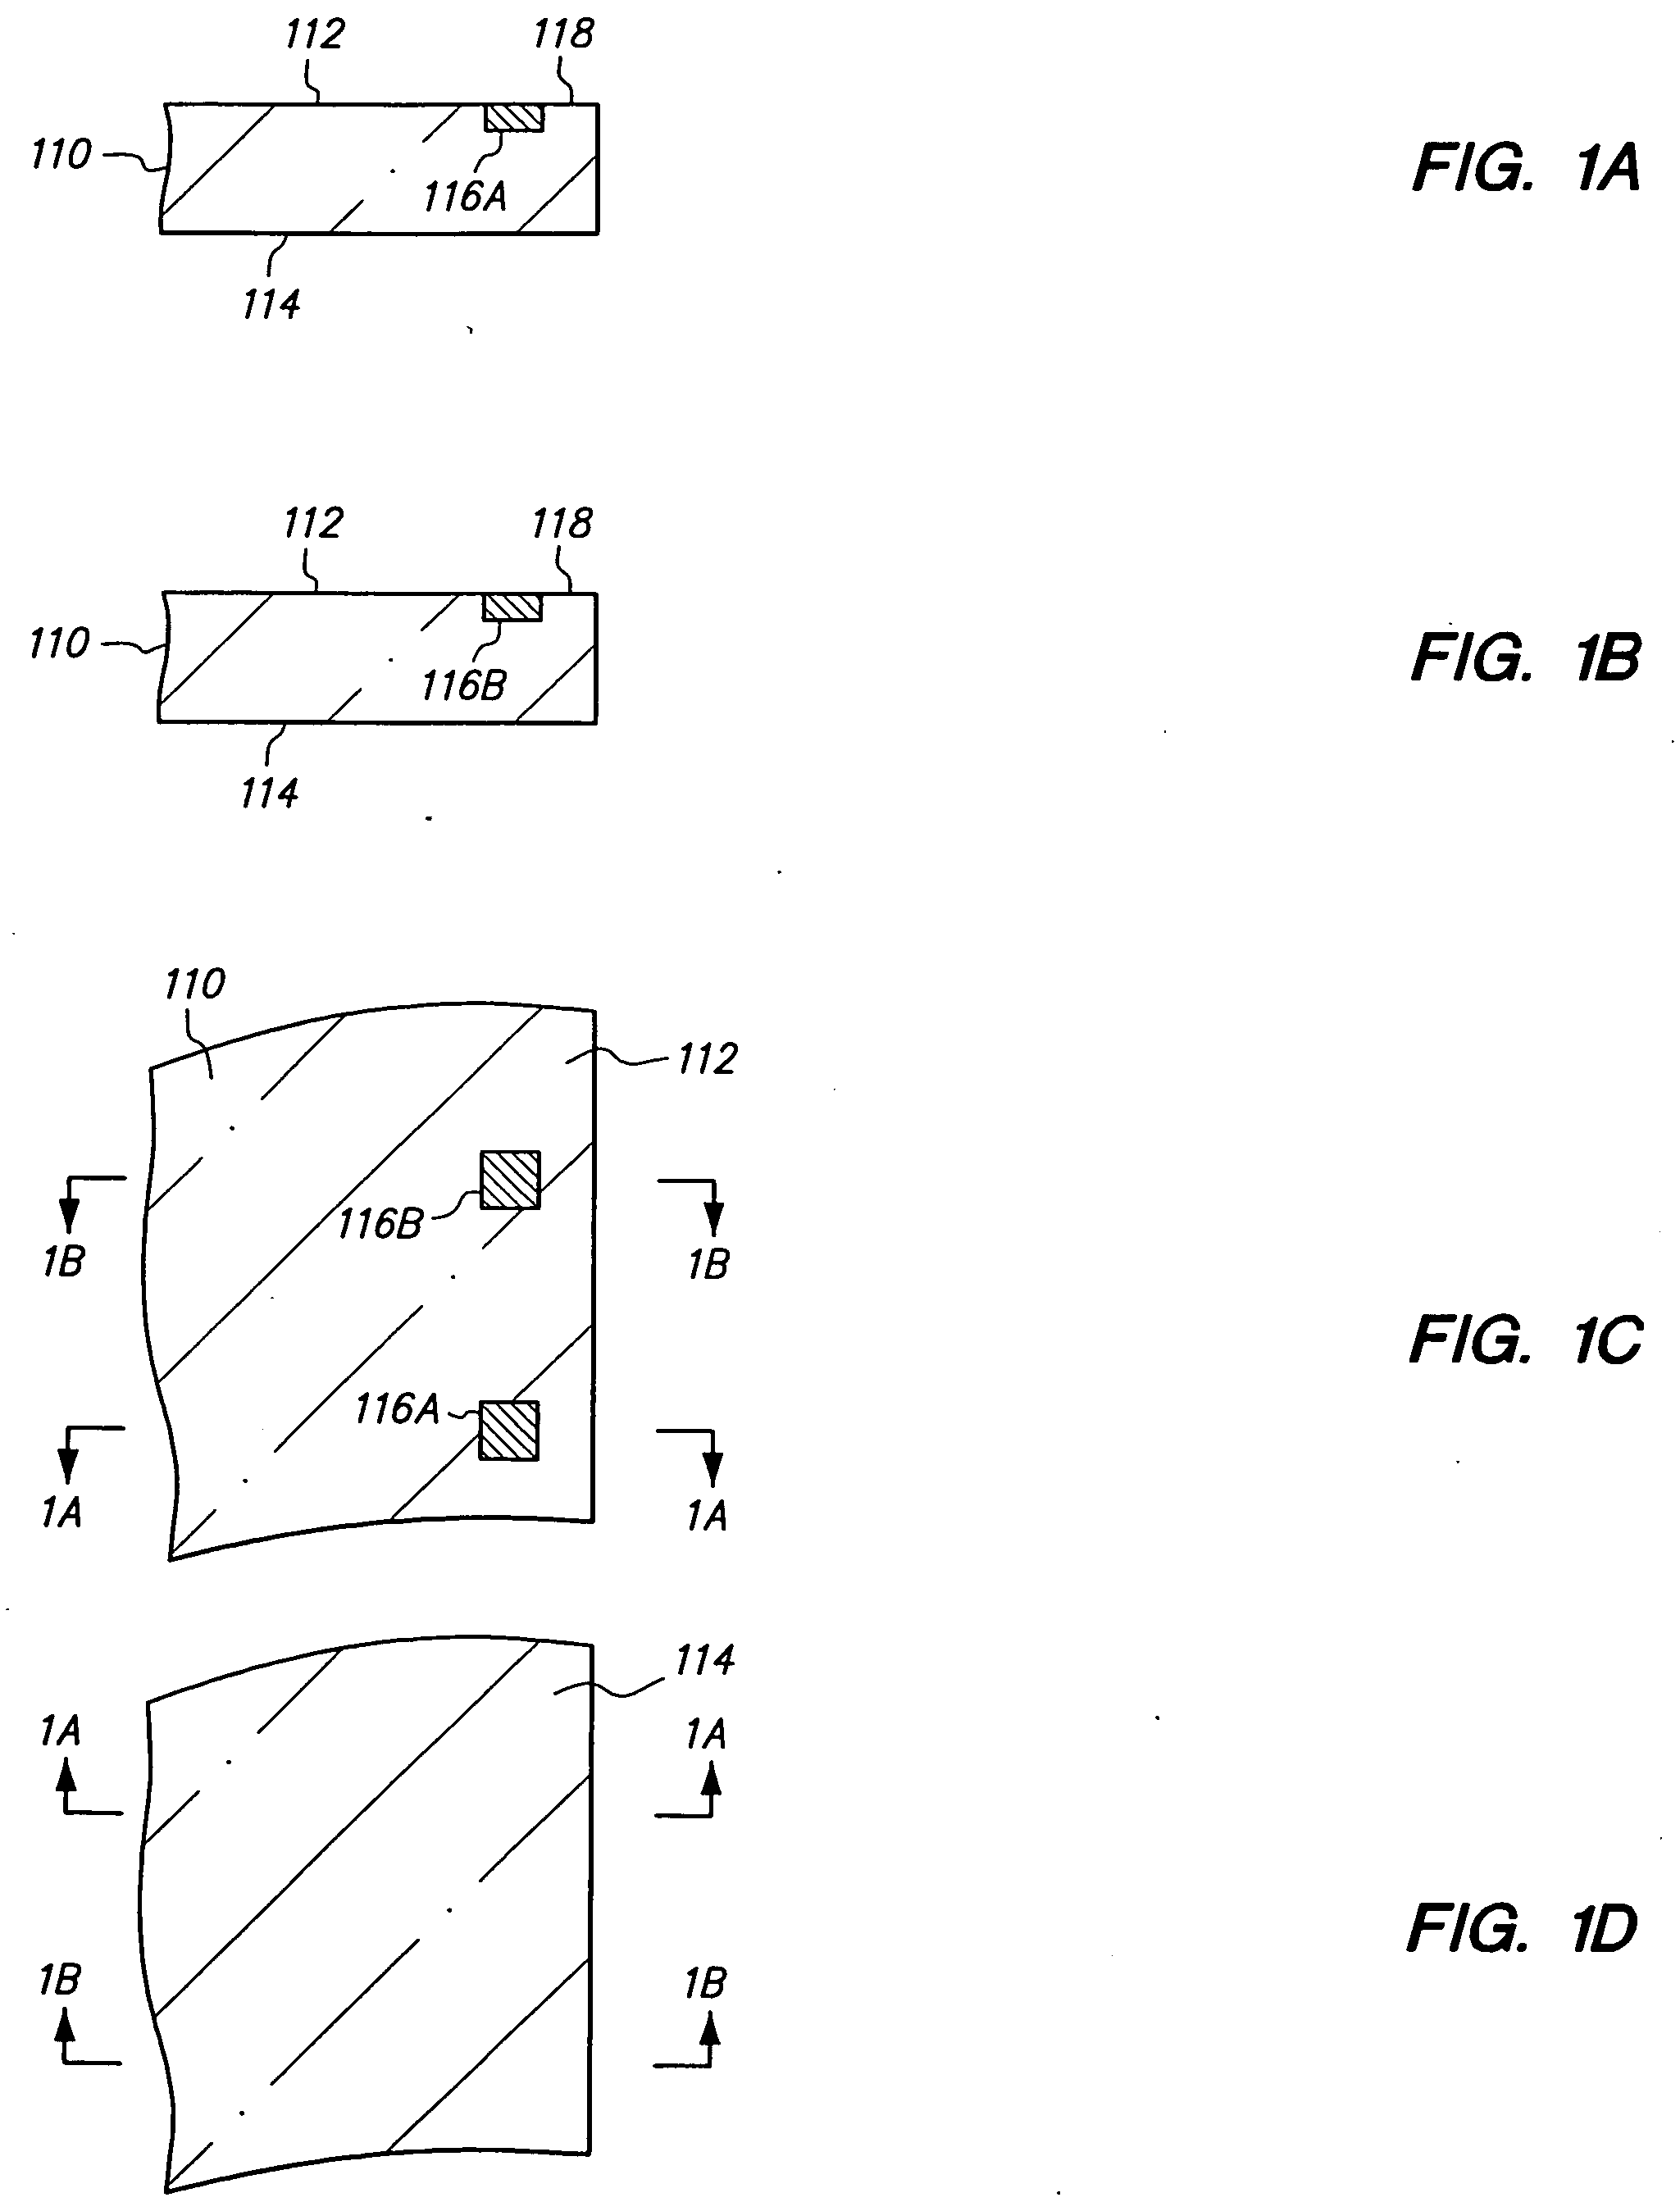 Method of making a semiconductor chip assembly using multiple etch steps to form a pillar after forming a routing line